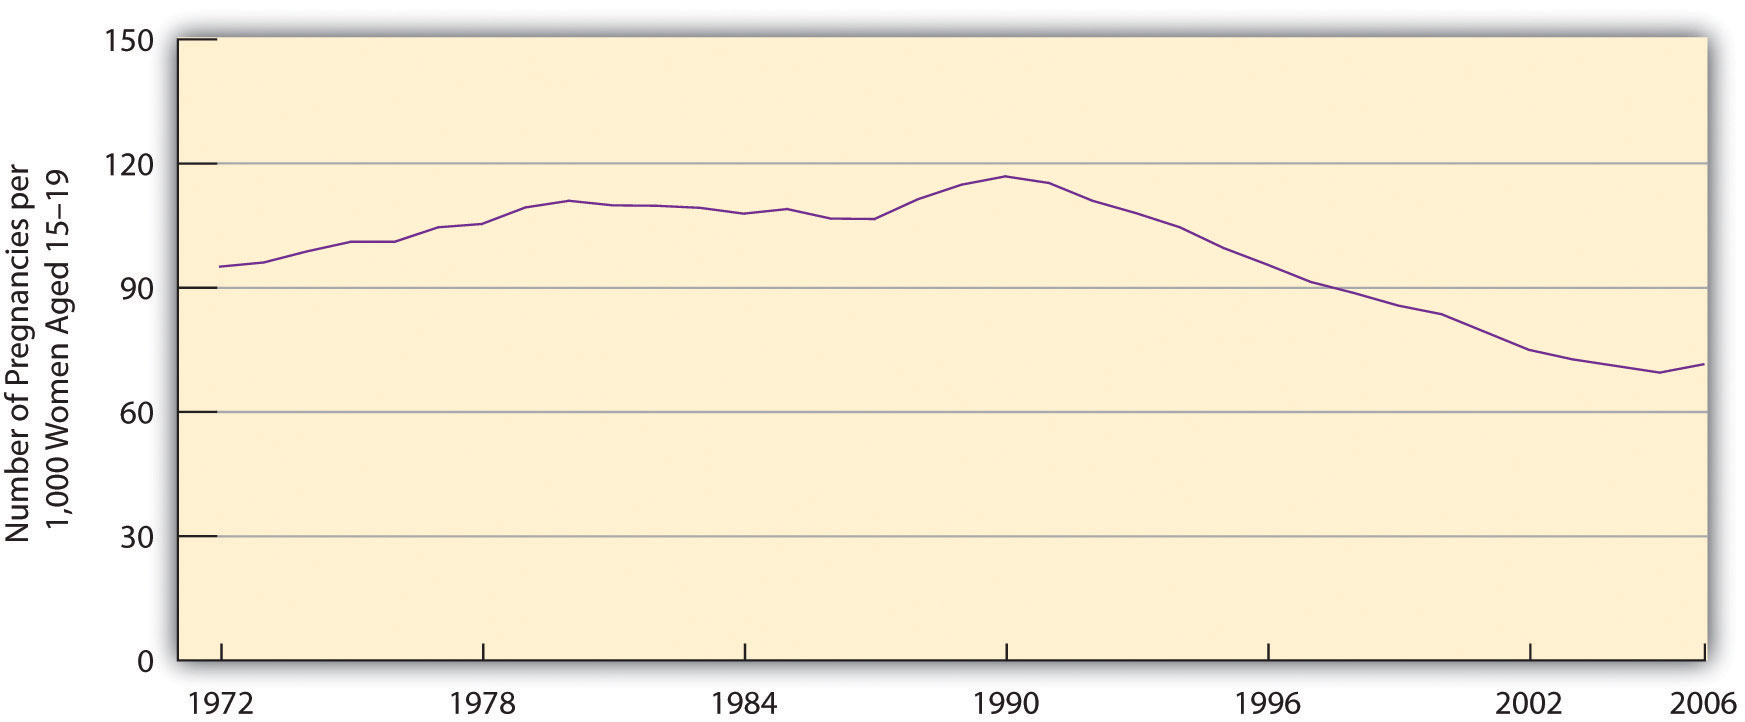 Pregnancy Rates for US Women Aged 15-19 has steadily declined from 1990 to 2006